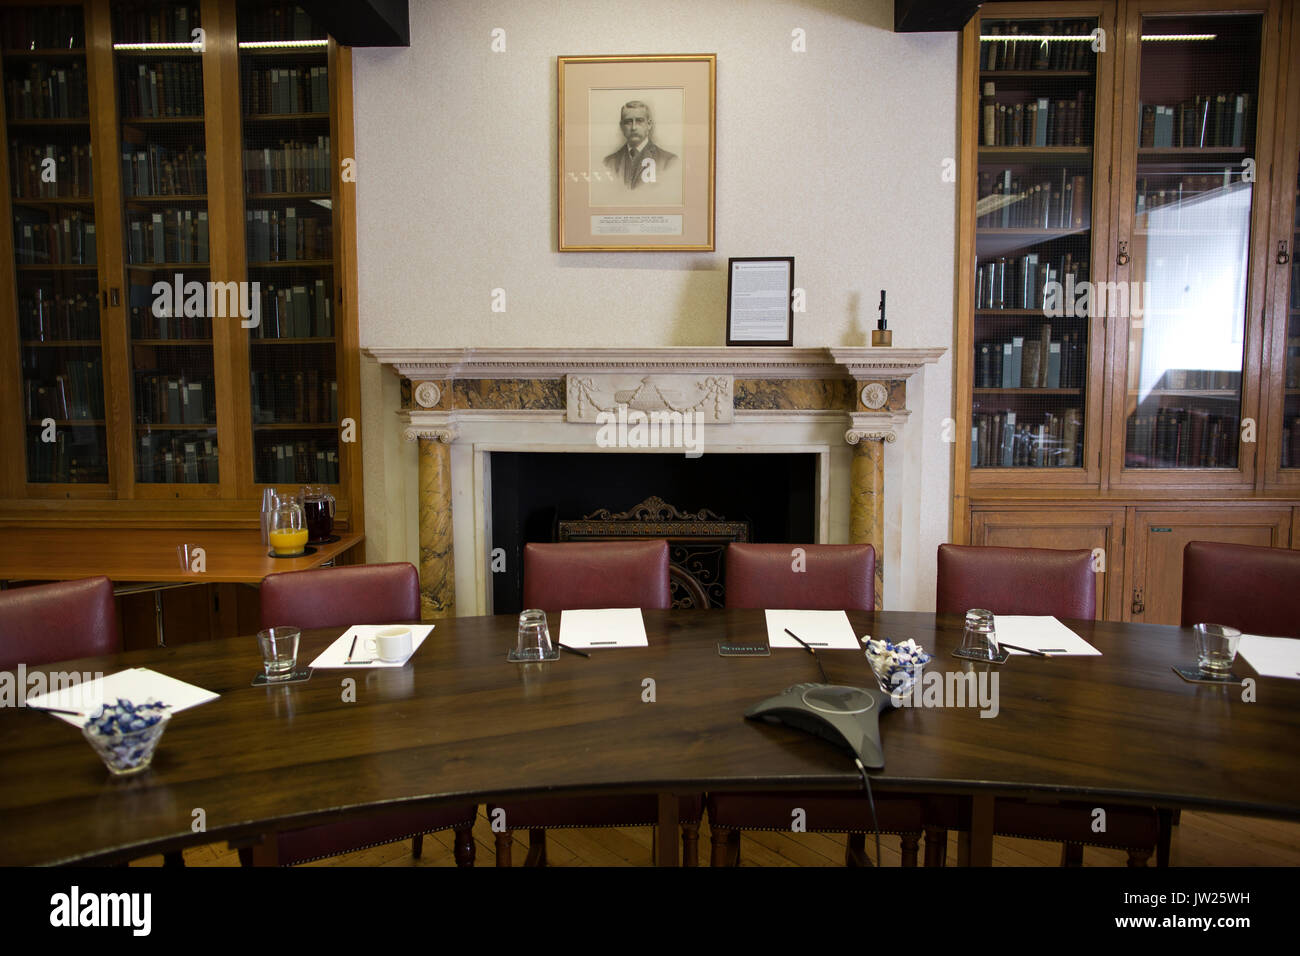 The Marcus Beck Library, historical former research laboratory for the Medical Research Council dating back to 1912, London, England, UK Stock Photo